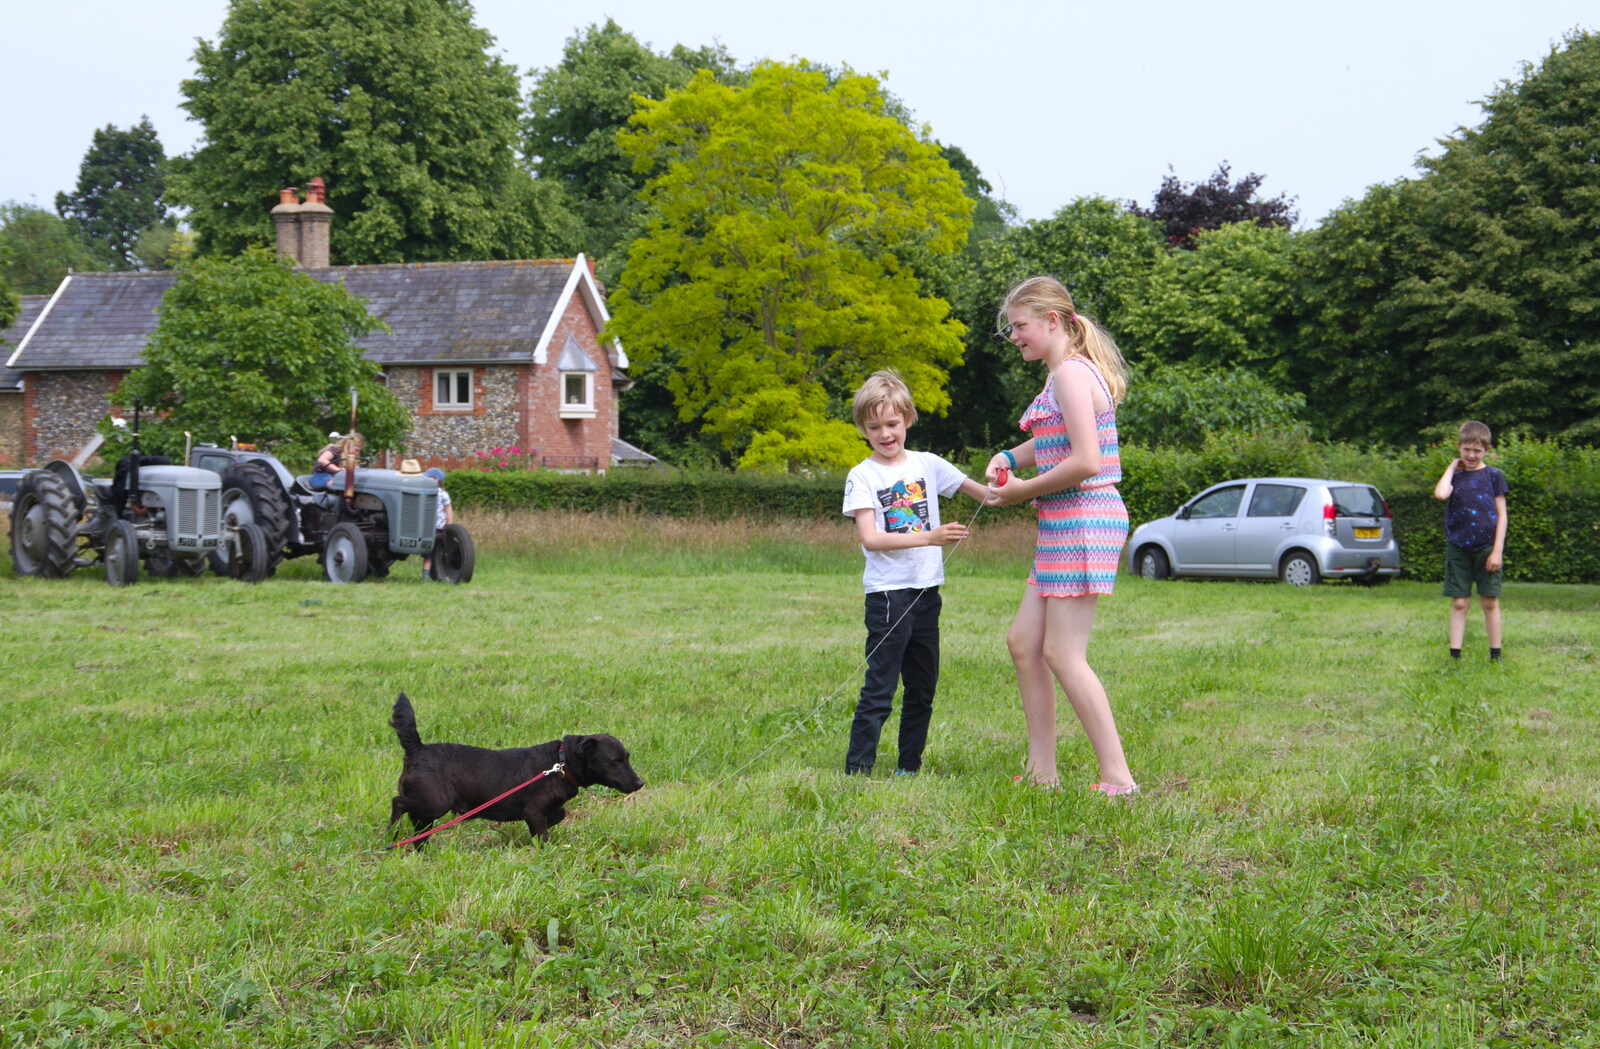 Harry has a go of Pip the dog from A Hog Roast on Little Green, Thrandeston, Suffolk - 23rd June 2019